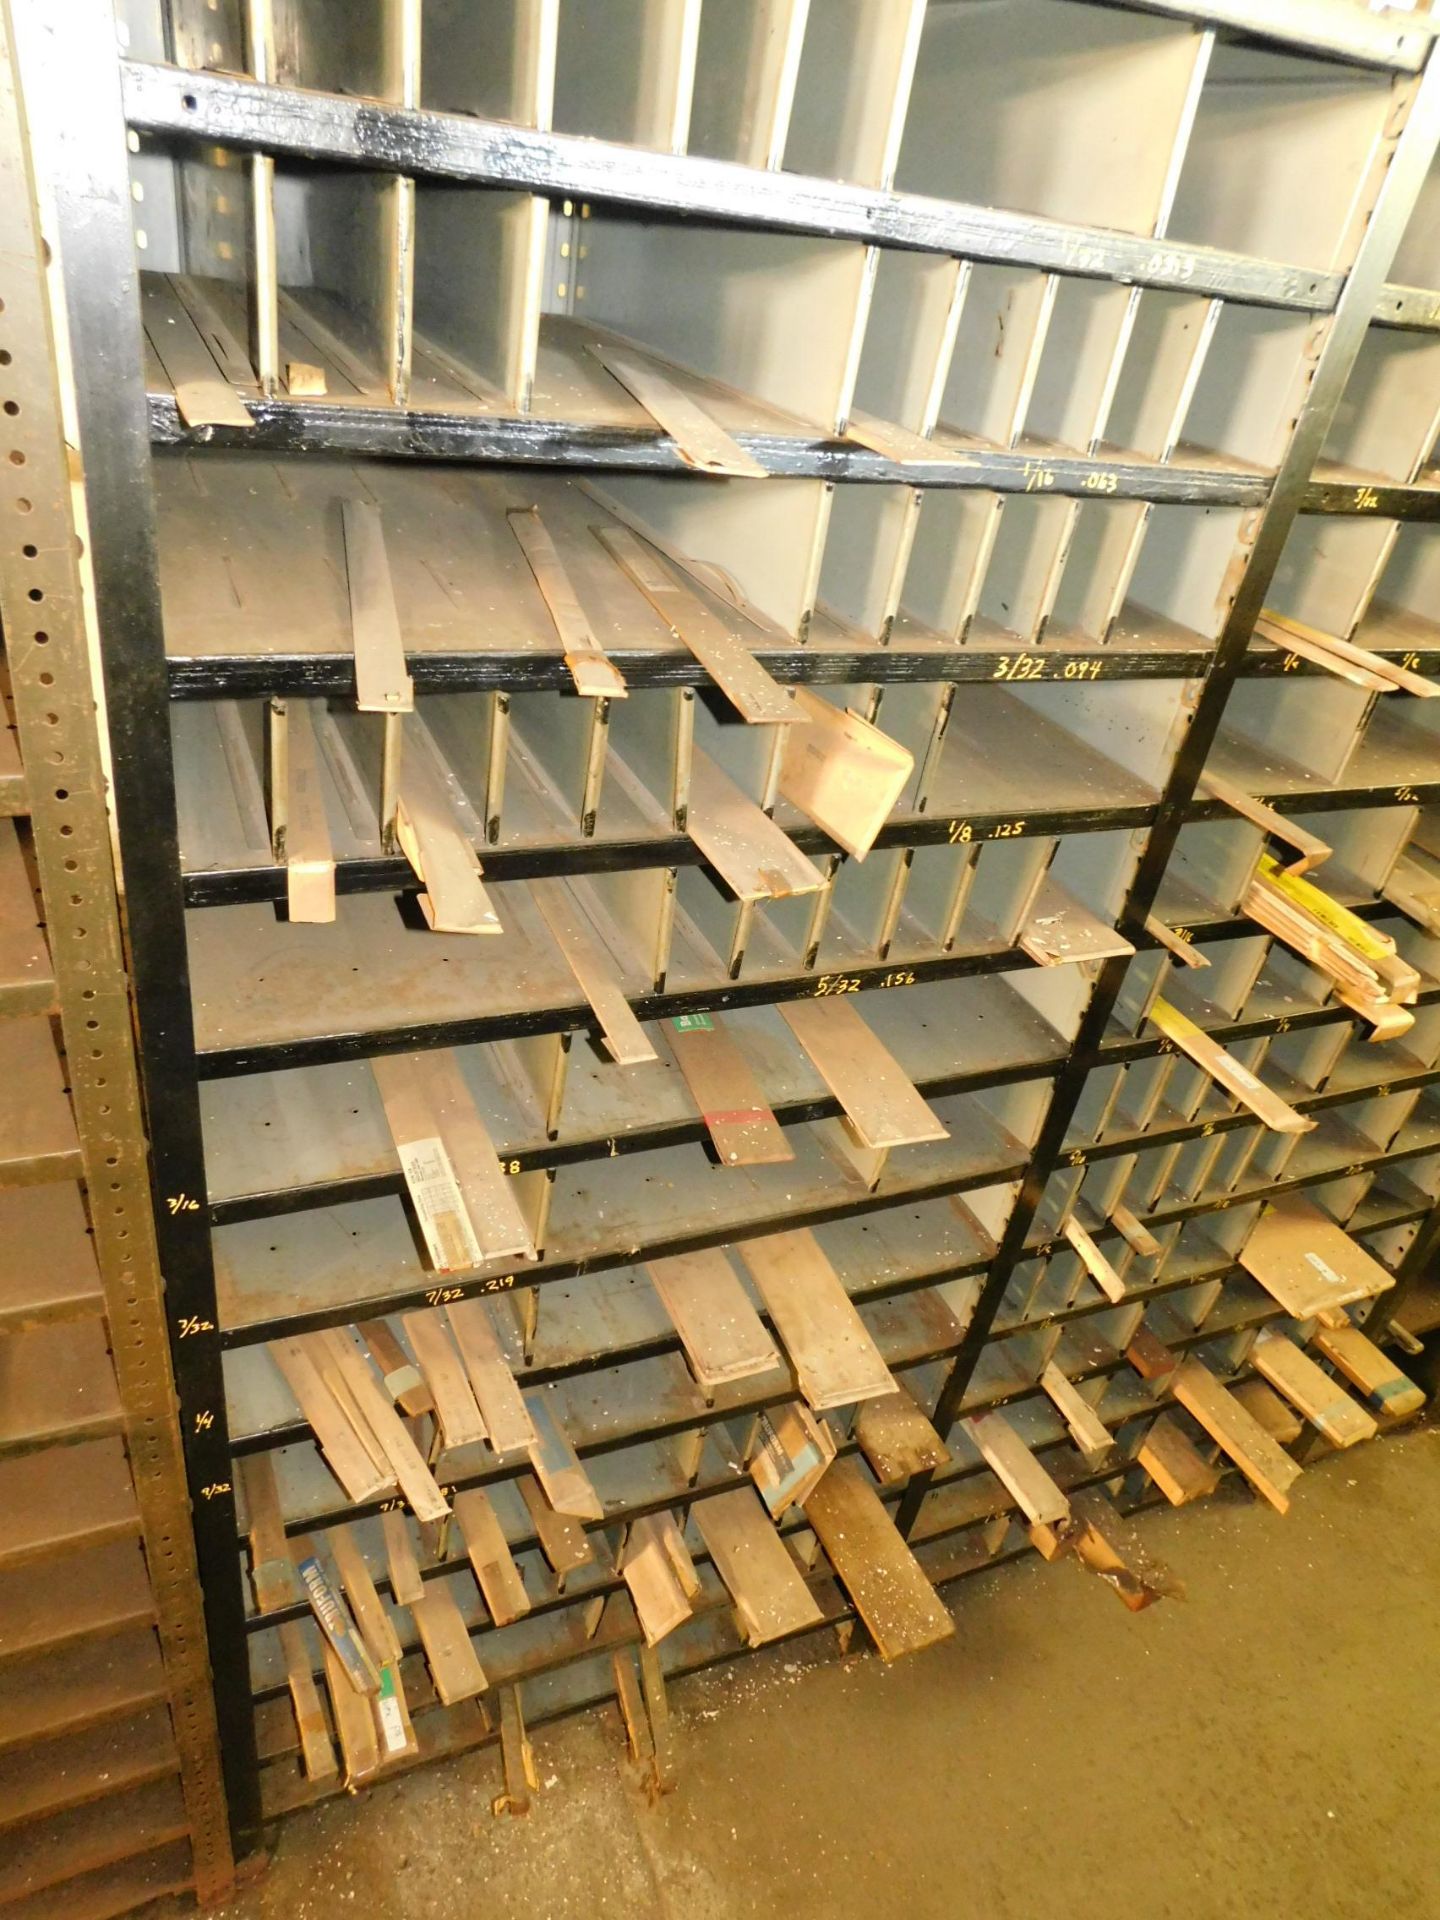 Contents of Precision Ground Stock on (8) Sections of Shelving - Image 3 of 8